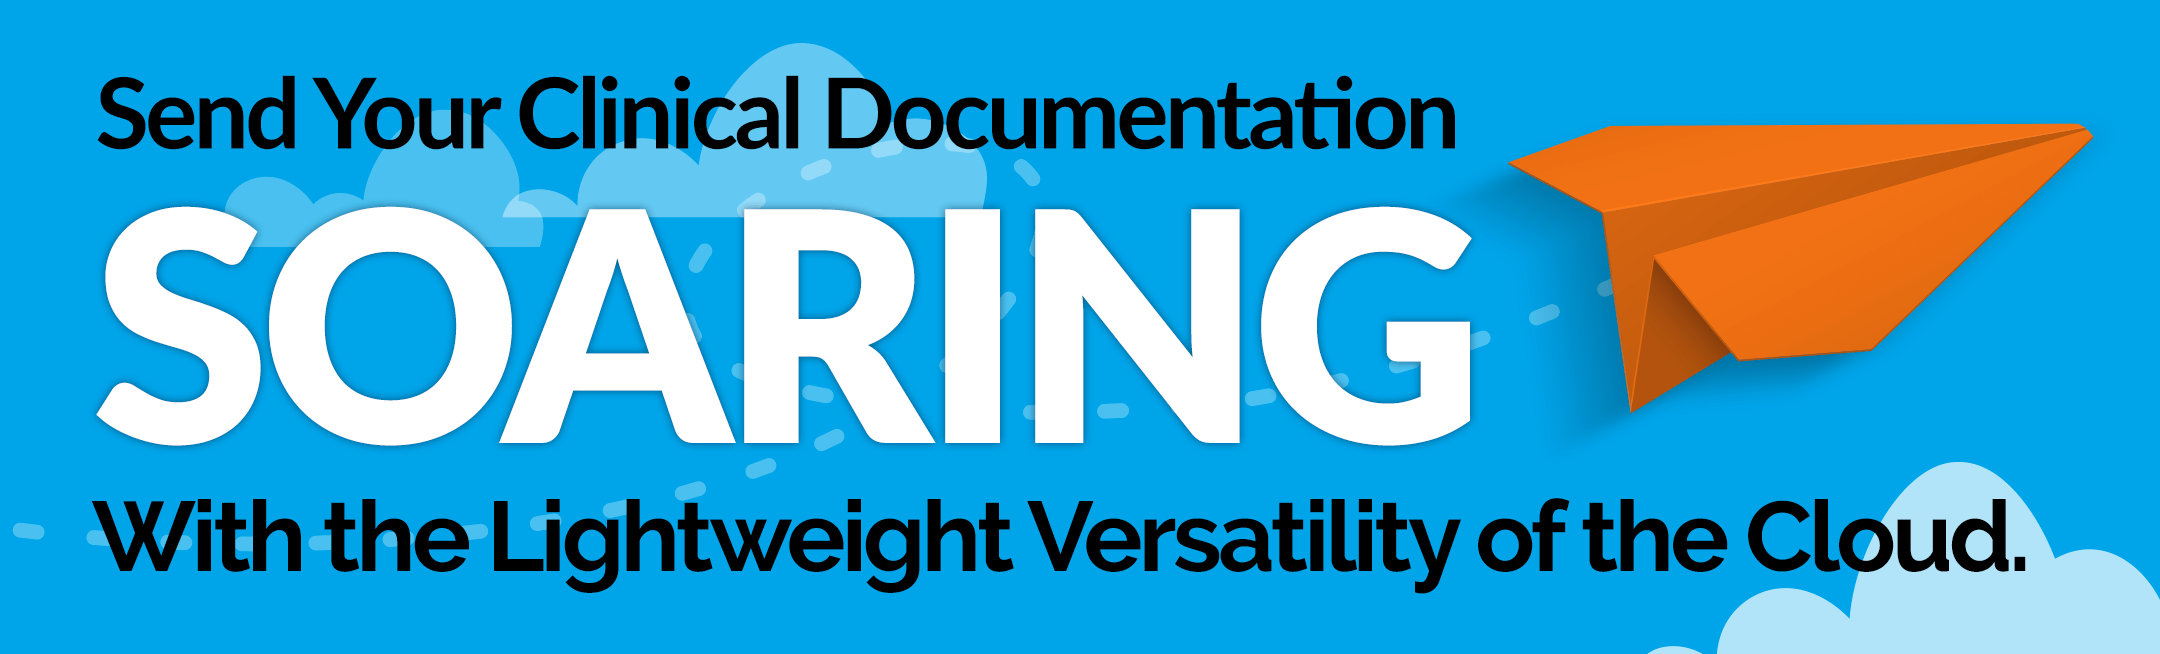 Send Your Clinical Documentation Soaring with the Lightweight Versatility of the Cloud.